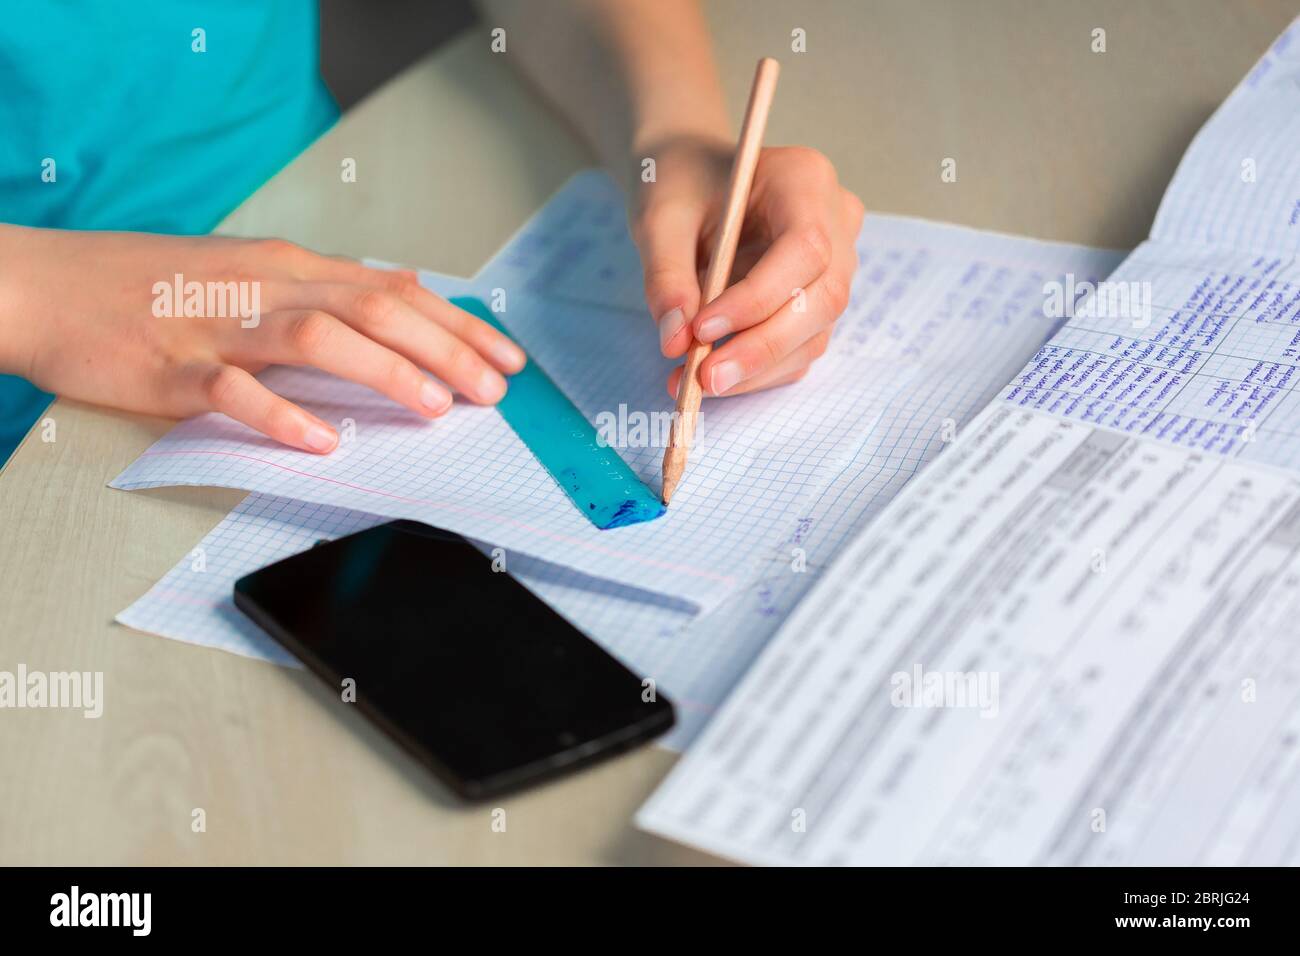 Teenage girl left-handed drawing with a ruler, close up on hands. Studying, education and exam concept Stock Photo